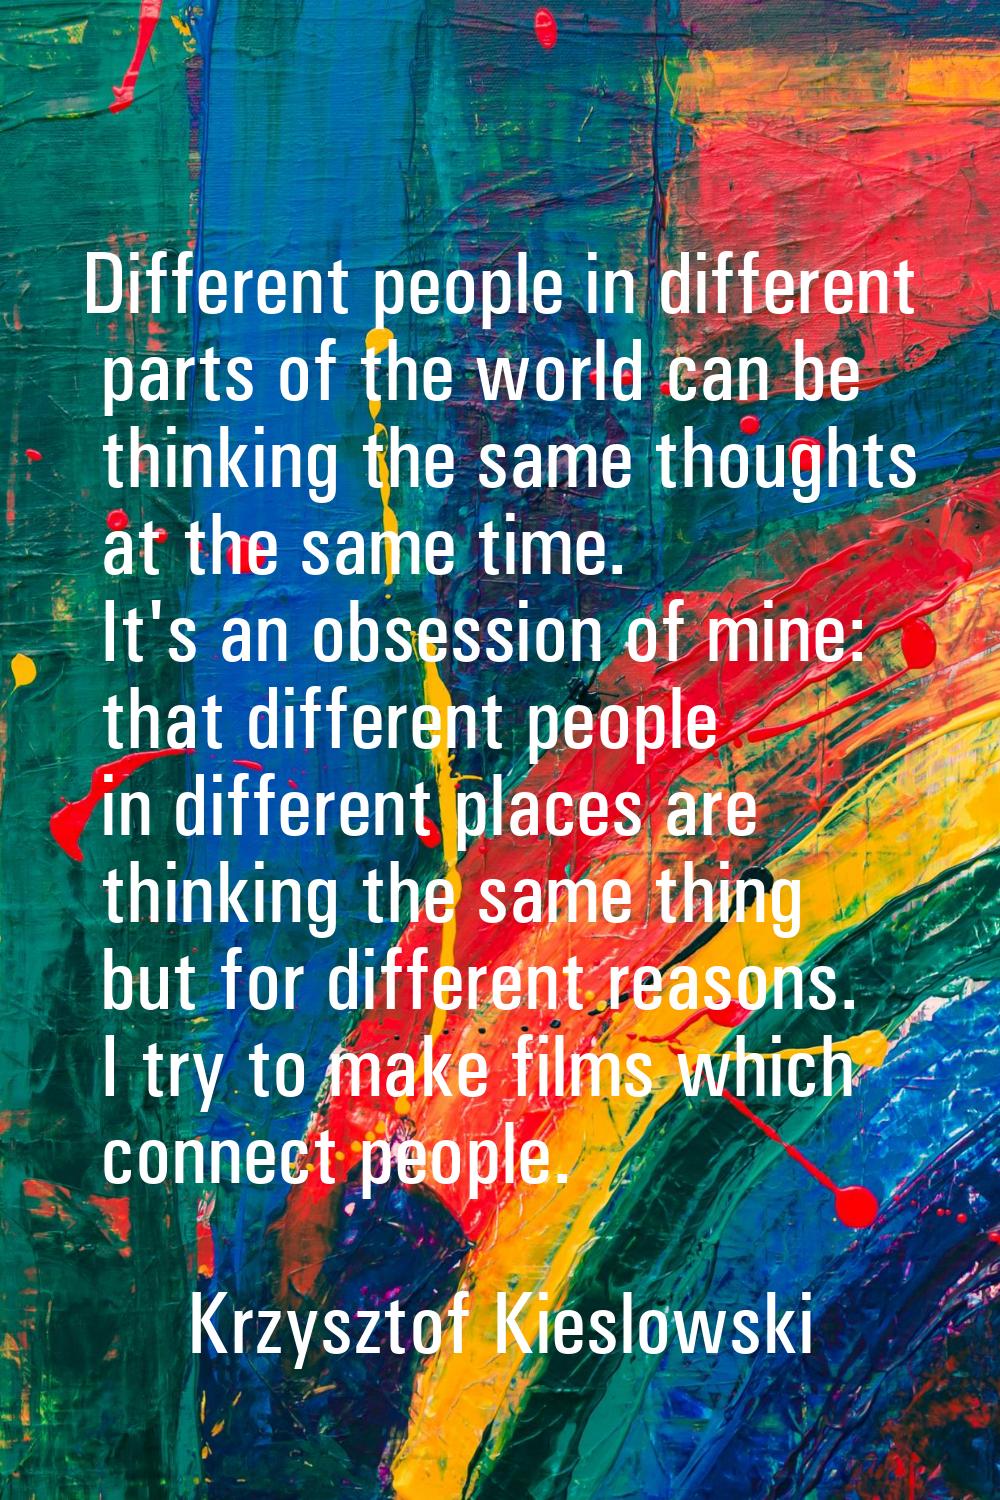 Different people in different parts of the world can be thinking the same thoughts at the same time